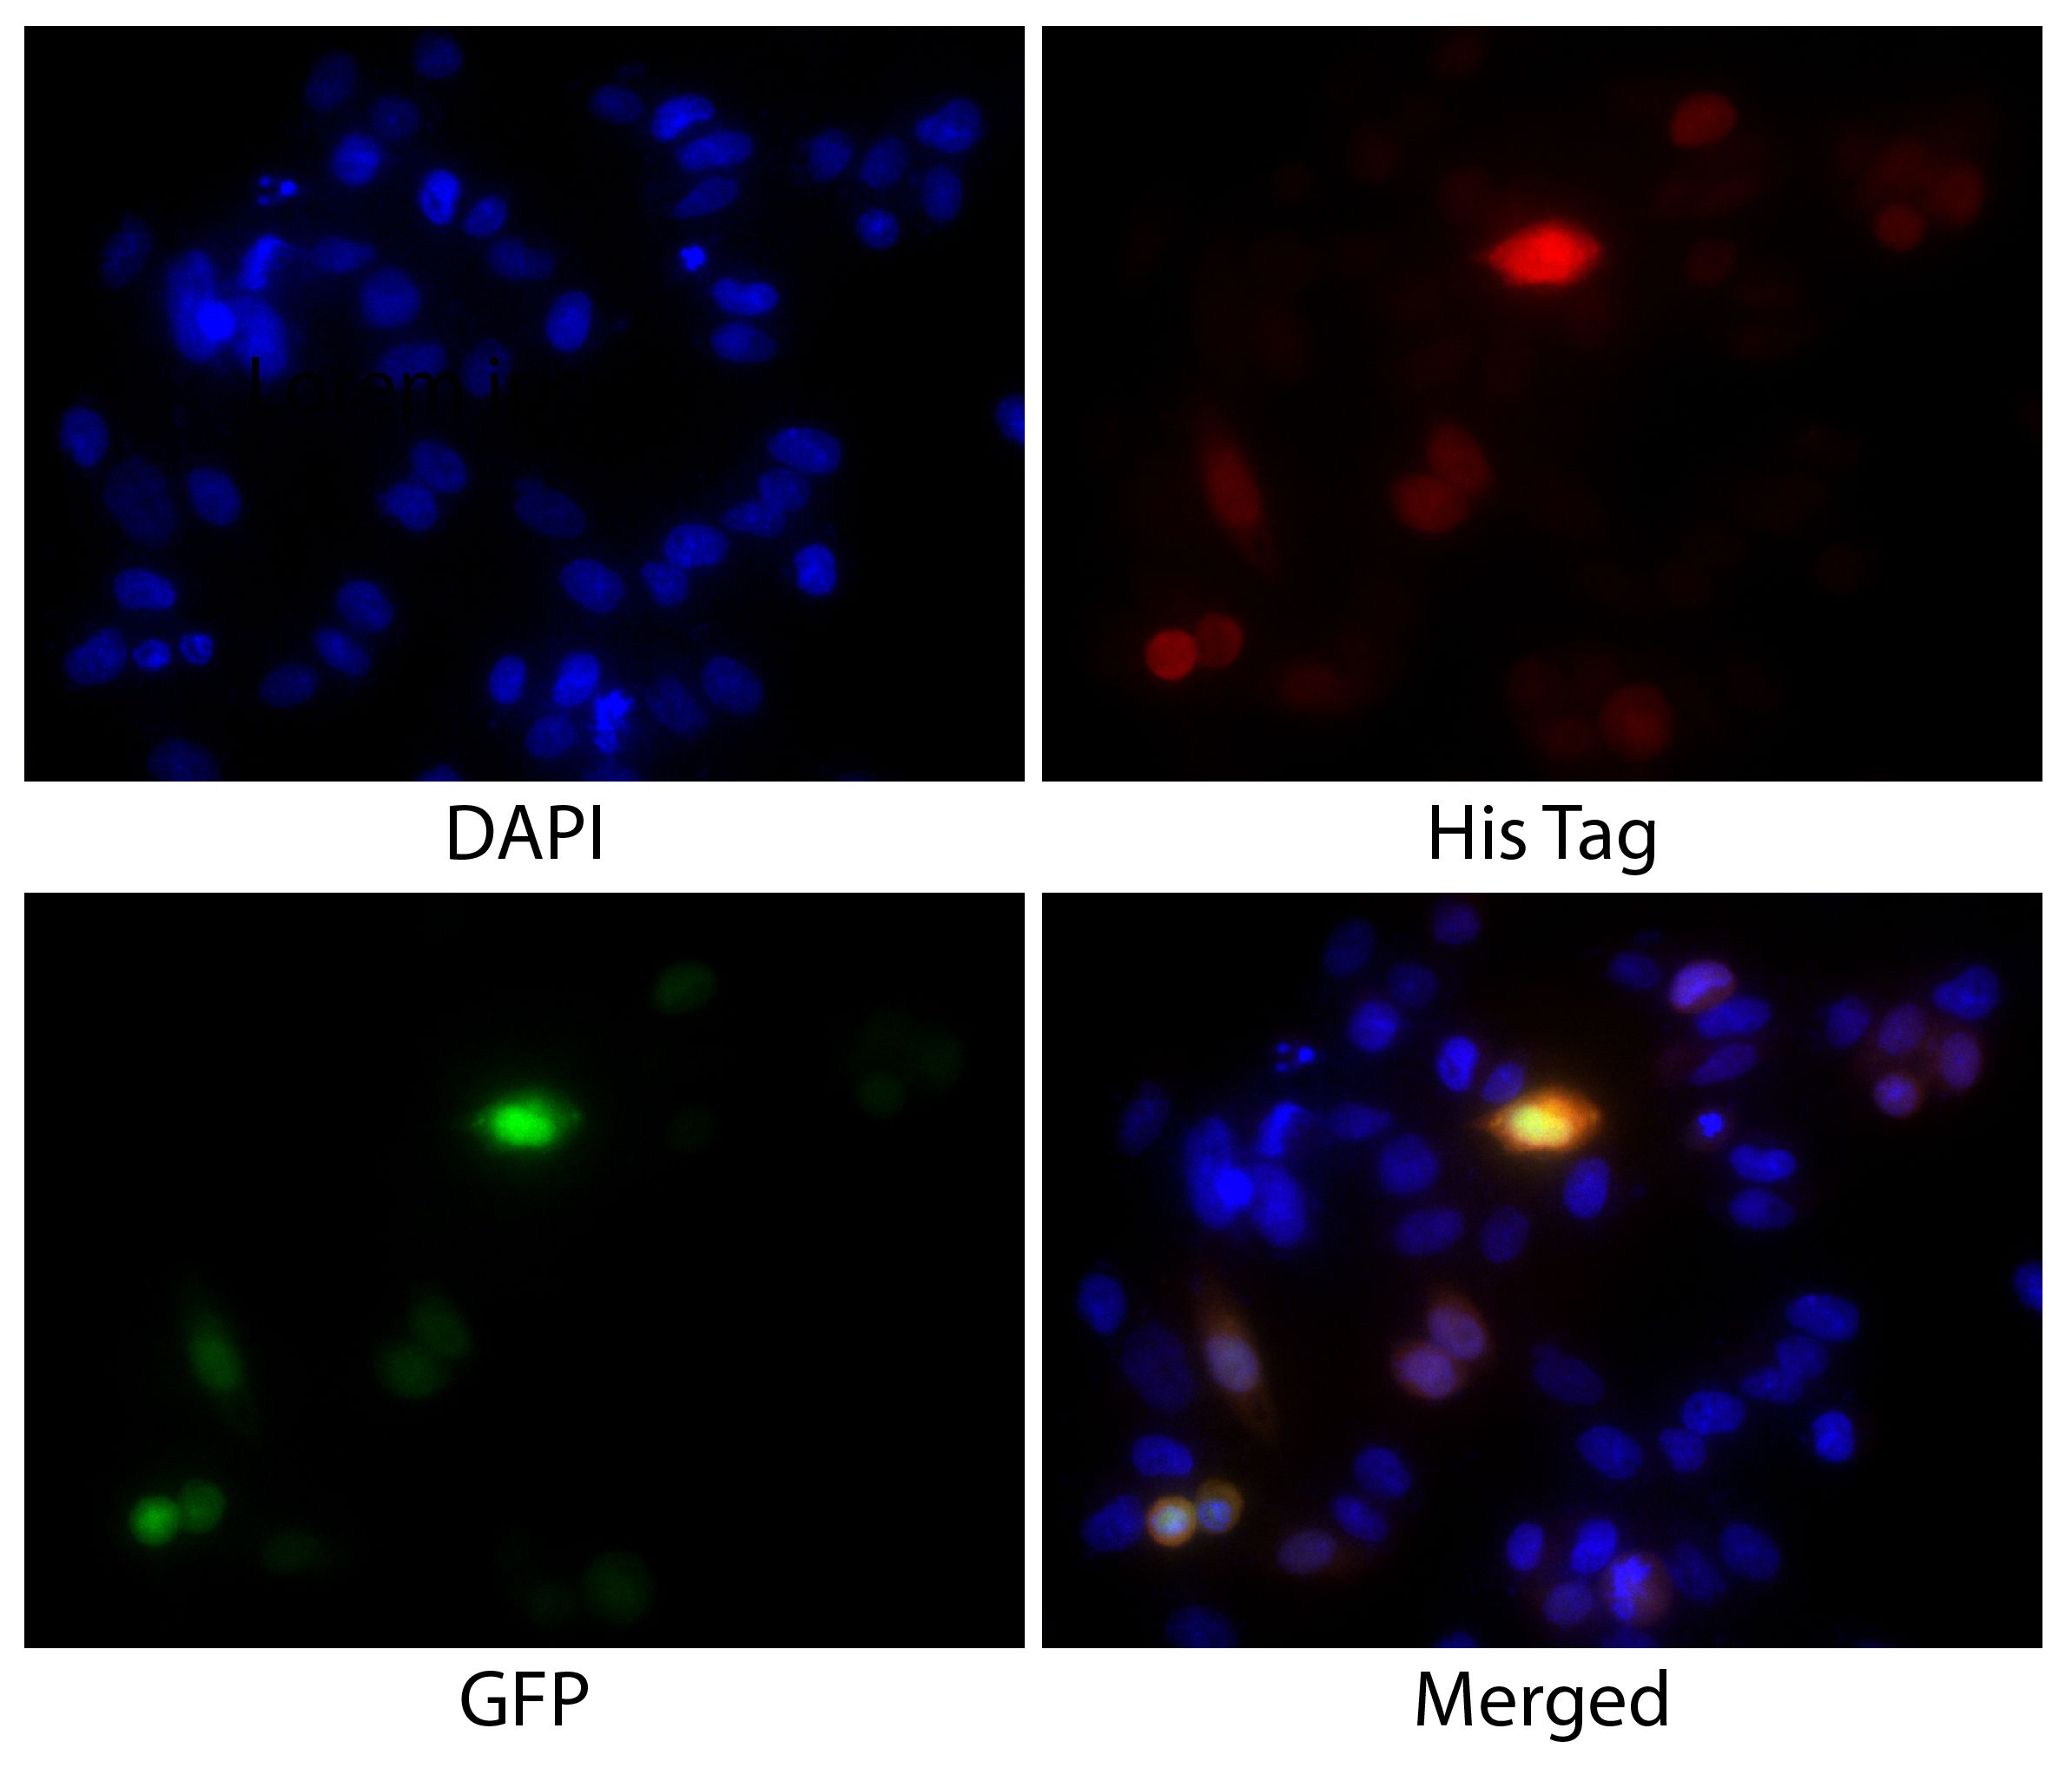 CHO-K1 cells transfected with GFP - N-terminal 6X His-tag were stained with Mouse Anti-His-Tag-BIOT (SB Cat. No. 4603-08) followed by Streptavidin-CY3 (SB Cat. No. 7100-12) and DAPI.